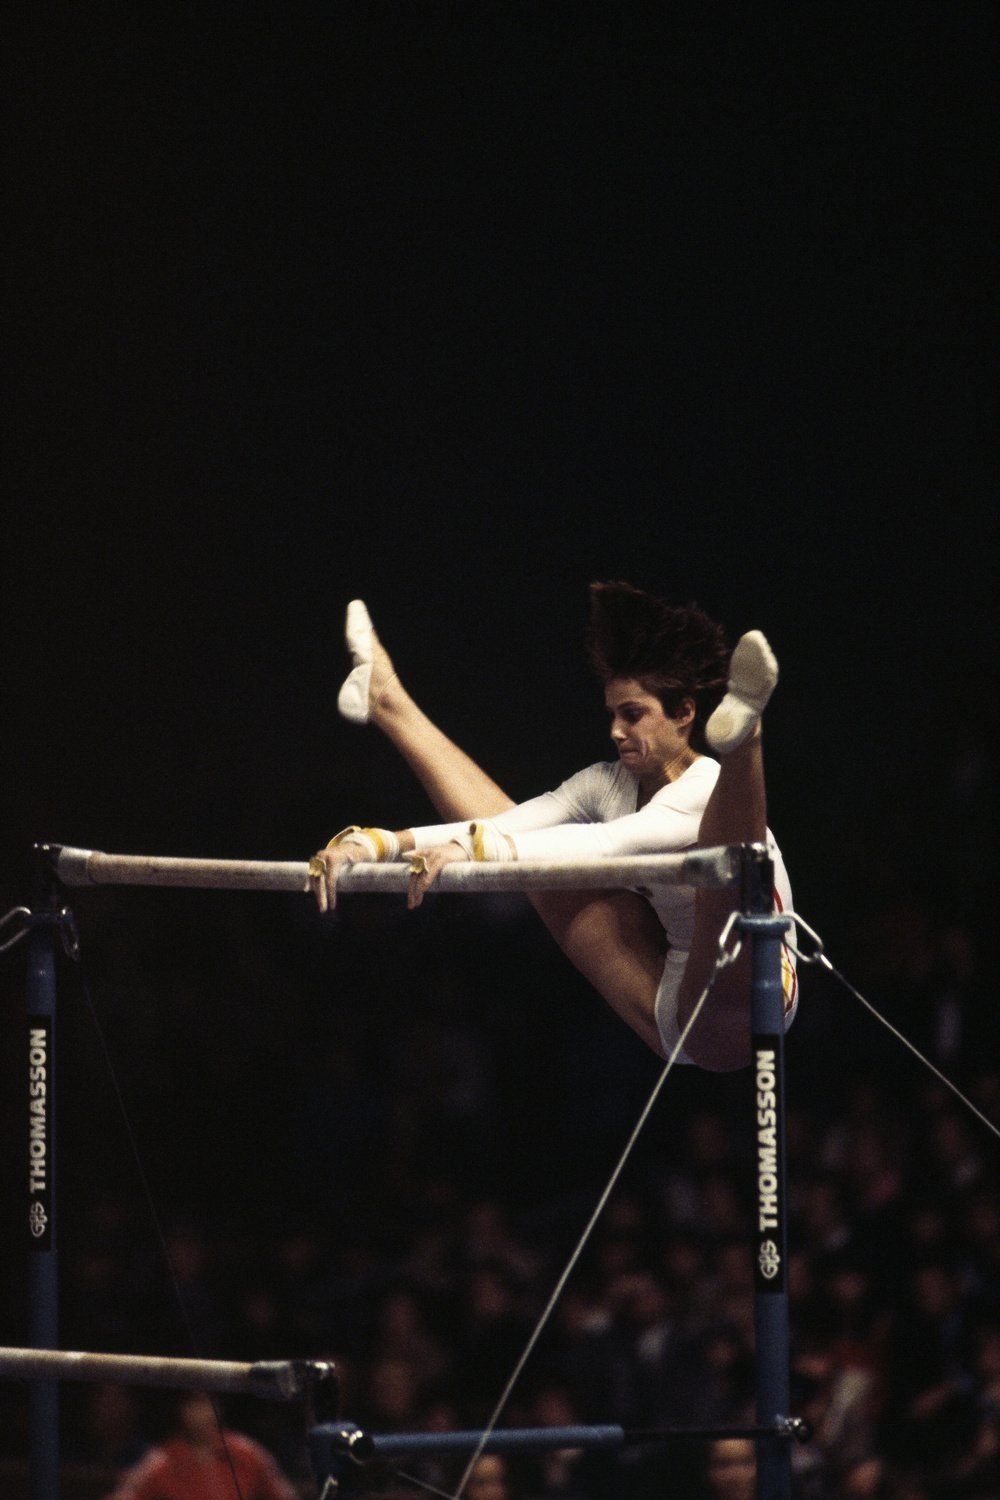 Romanian gymnast Nadia Comaneci performs on the uneven bars during the 1980 Summer Olympics.   (Photo by Jean-Yves Ruszniewski/Corbis/VCG via Getty Images)